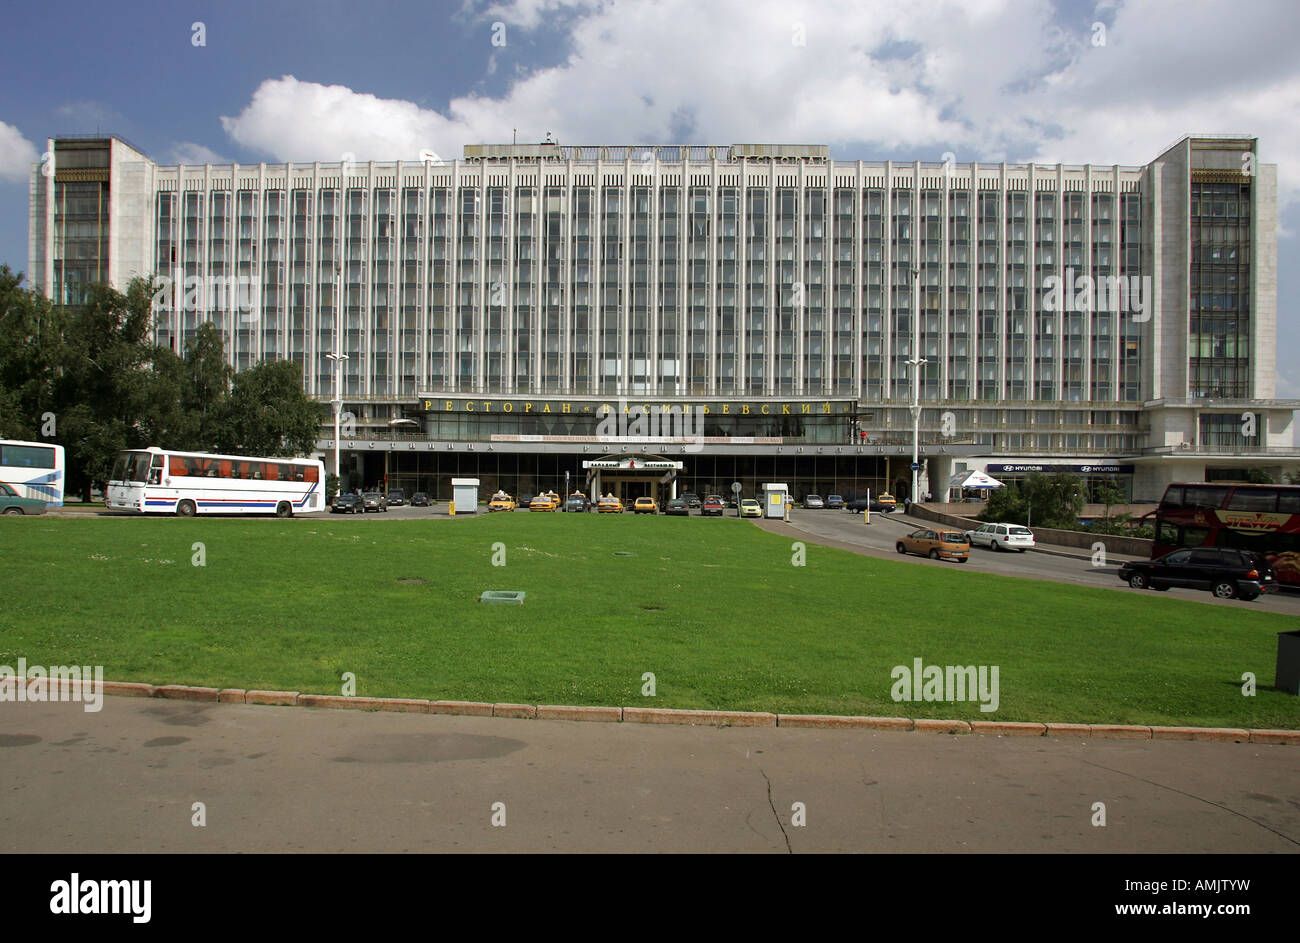 The Hotel Russia Moscow Stock Photo 15280716 Alamy - 